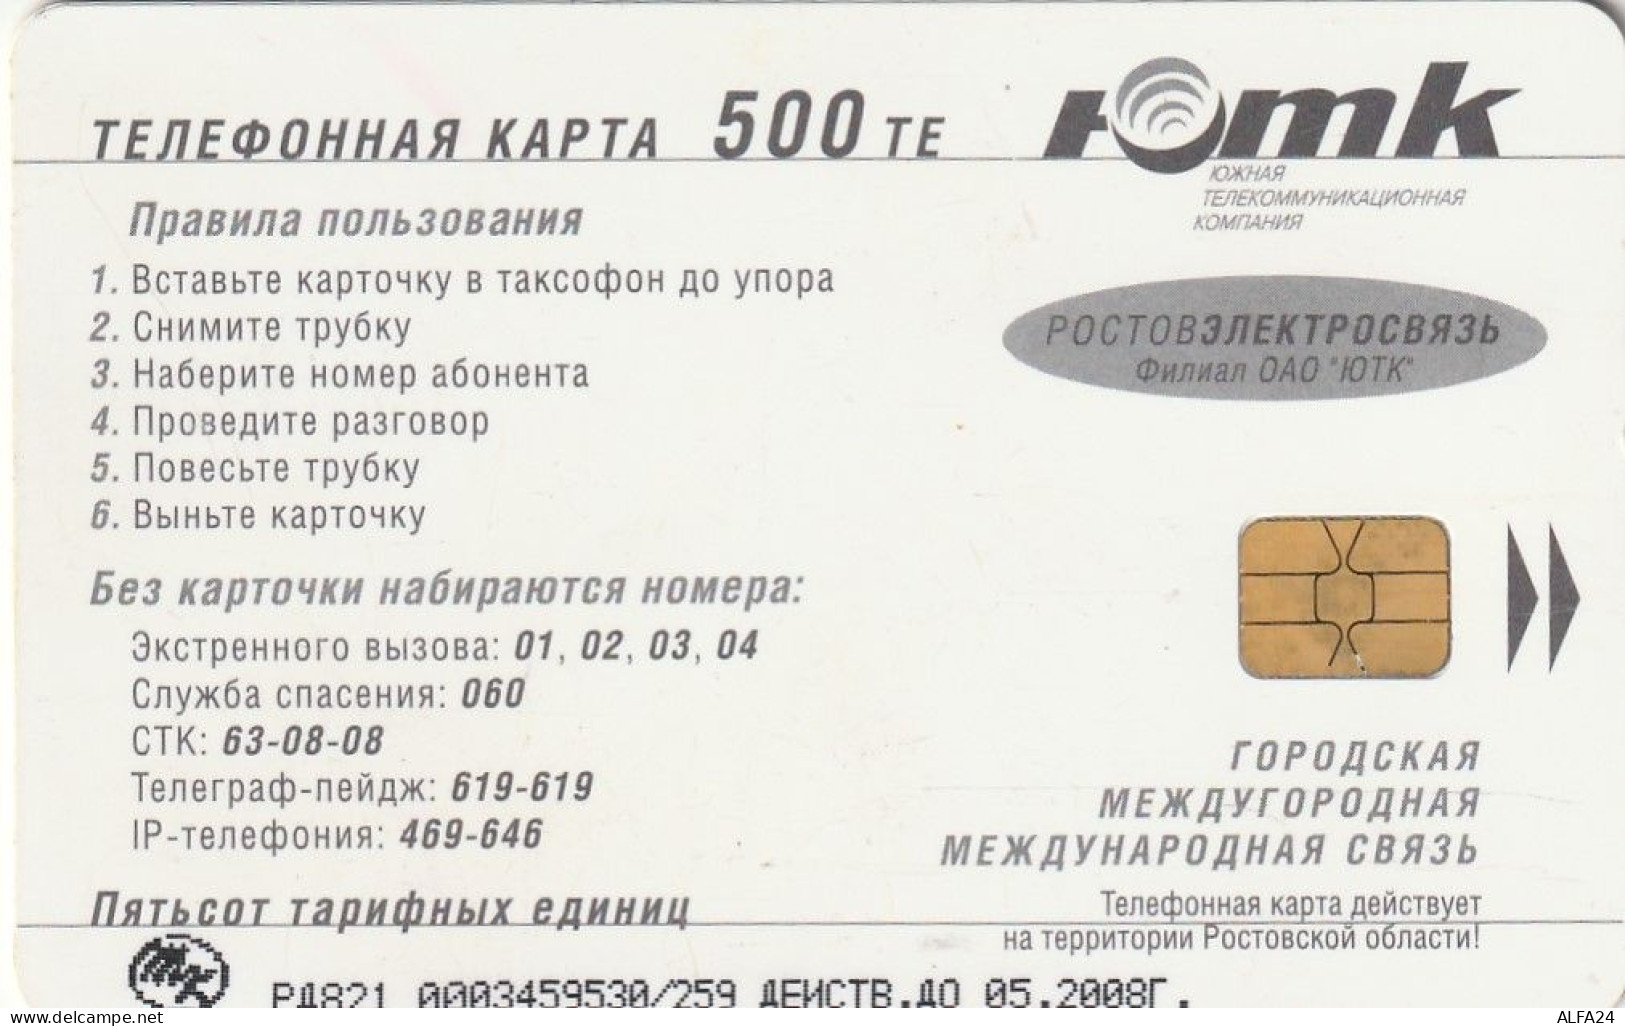 PHONE CARD RUSSIA Rostovelectrosvyaz - Rostov-on-Don (RUS12.5 - Russia